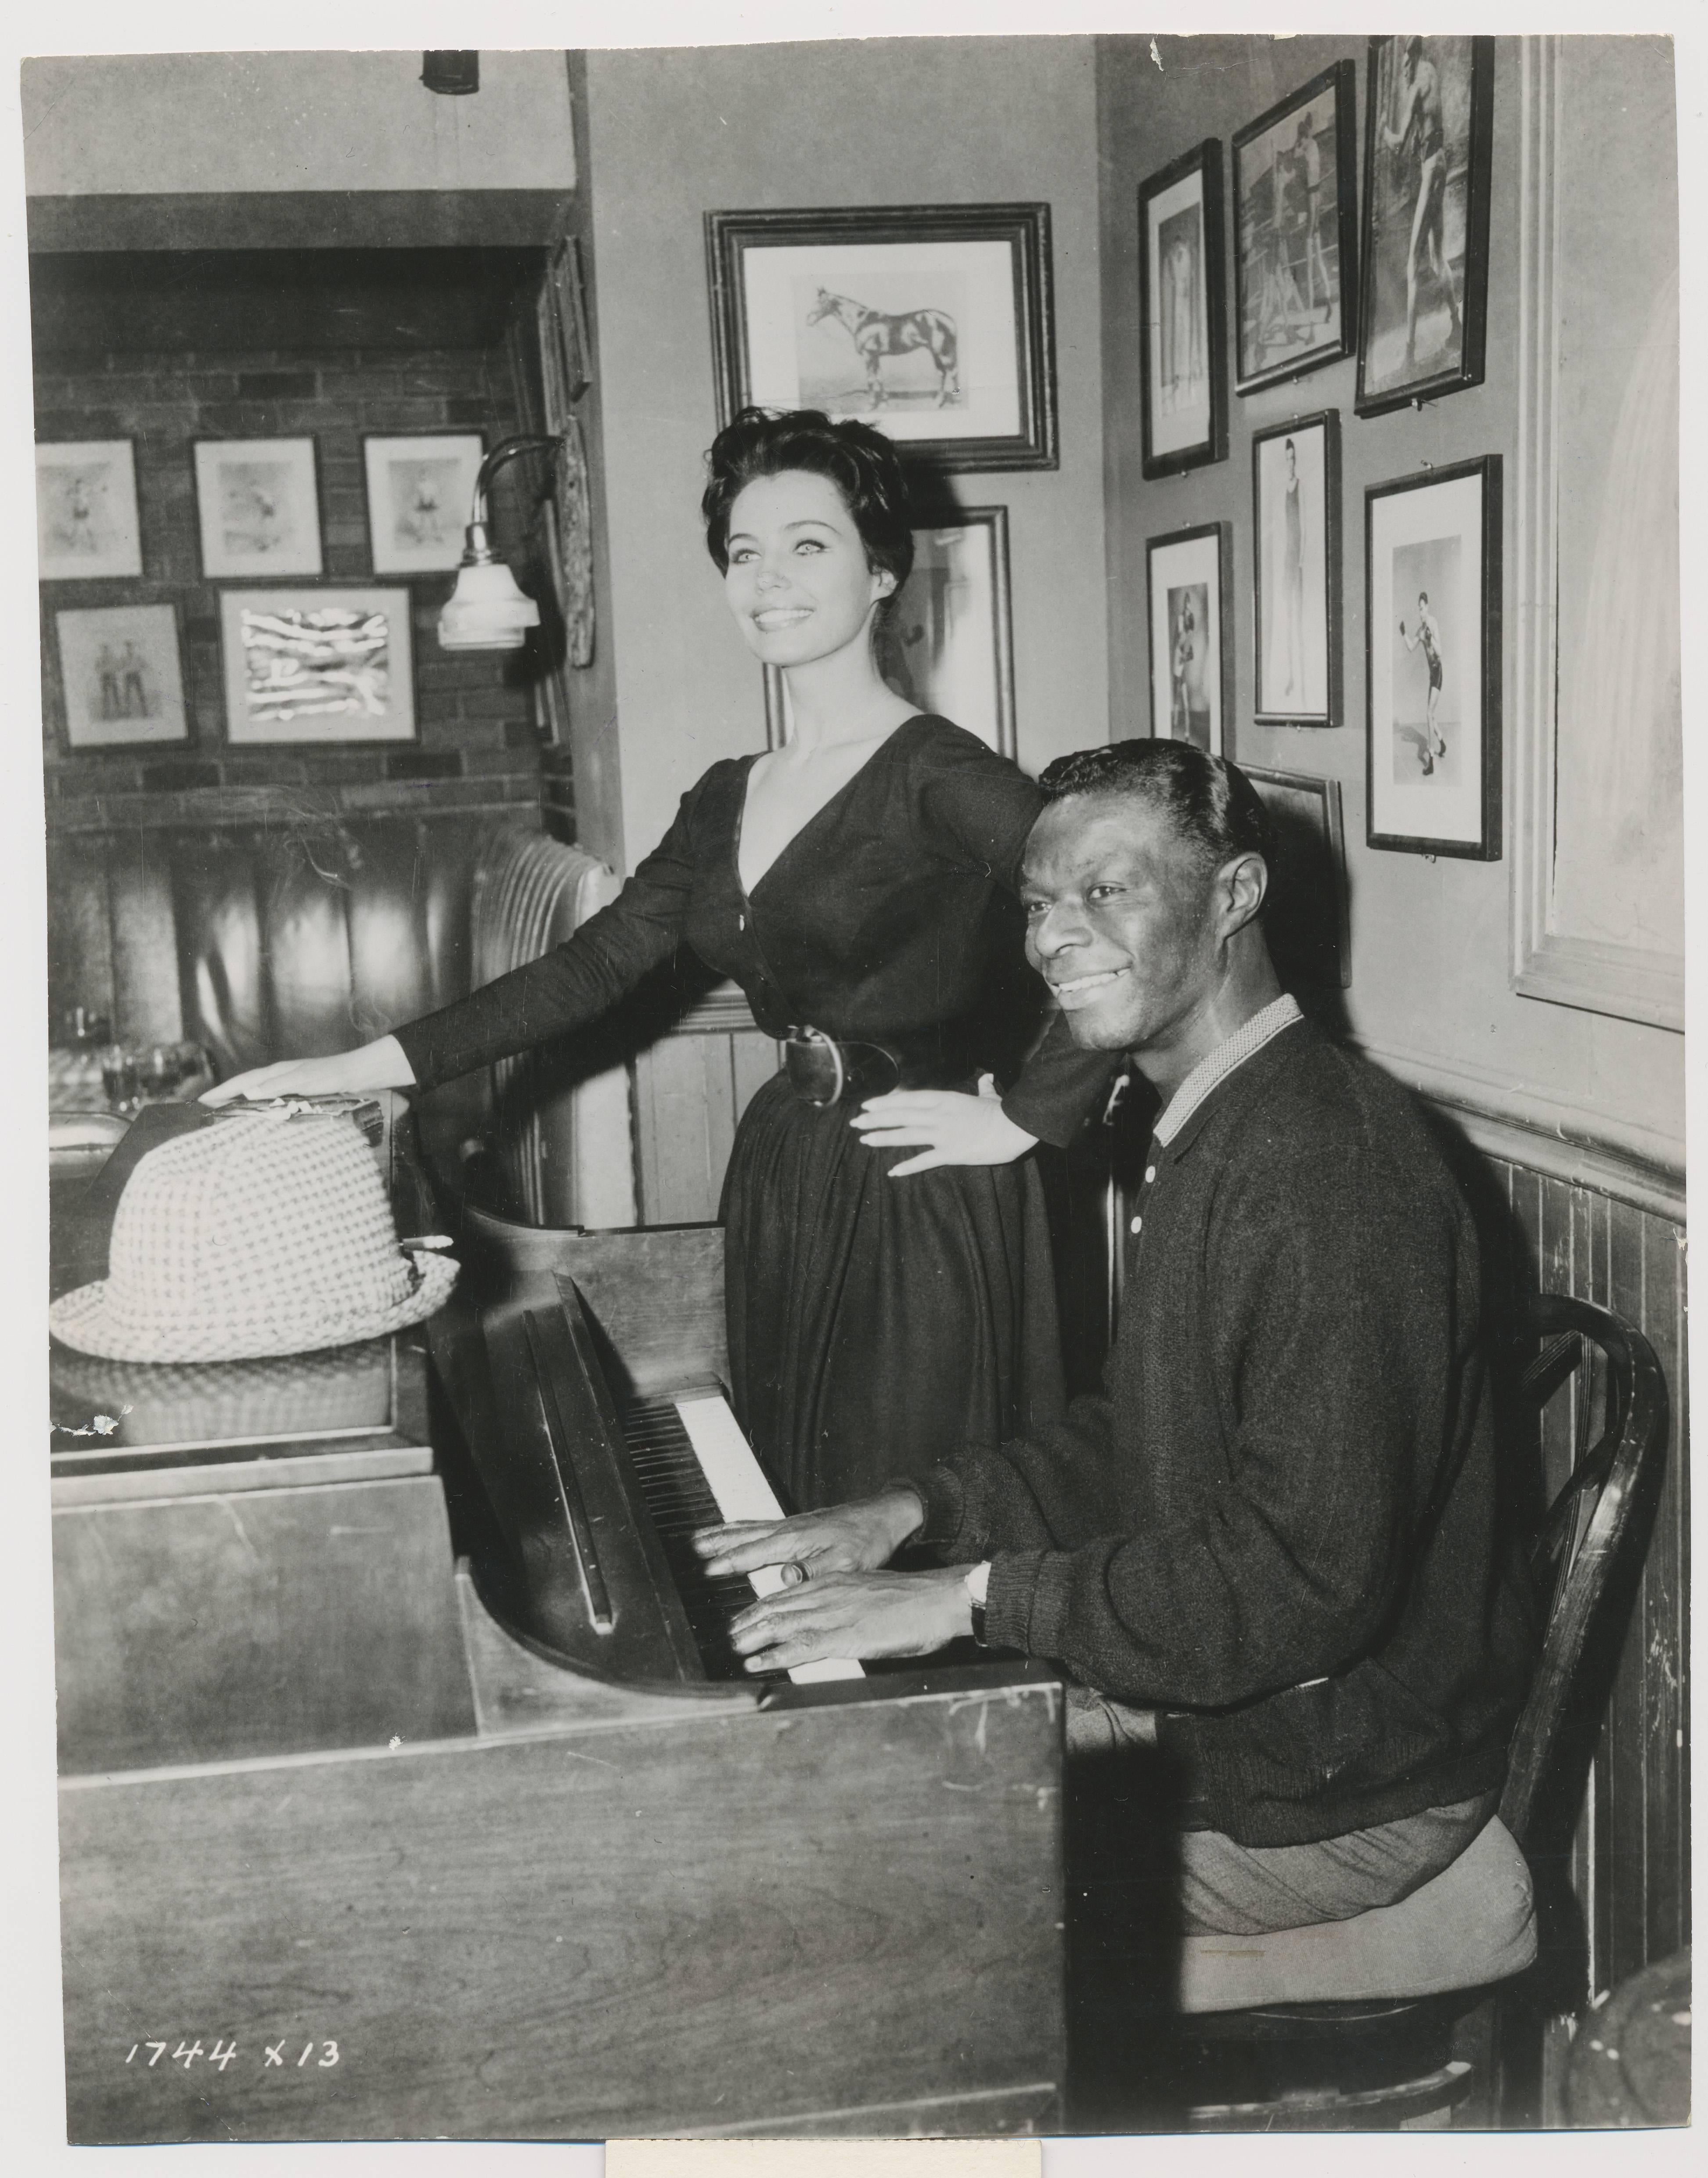 Unknown Black and White Photograph - Nat 'King' Cole and Cathy Crosby in "Night of the Quarter Moon"